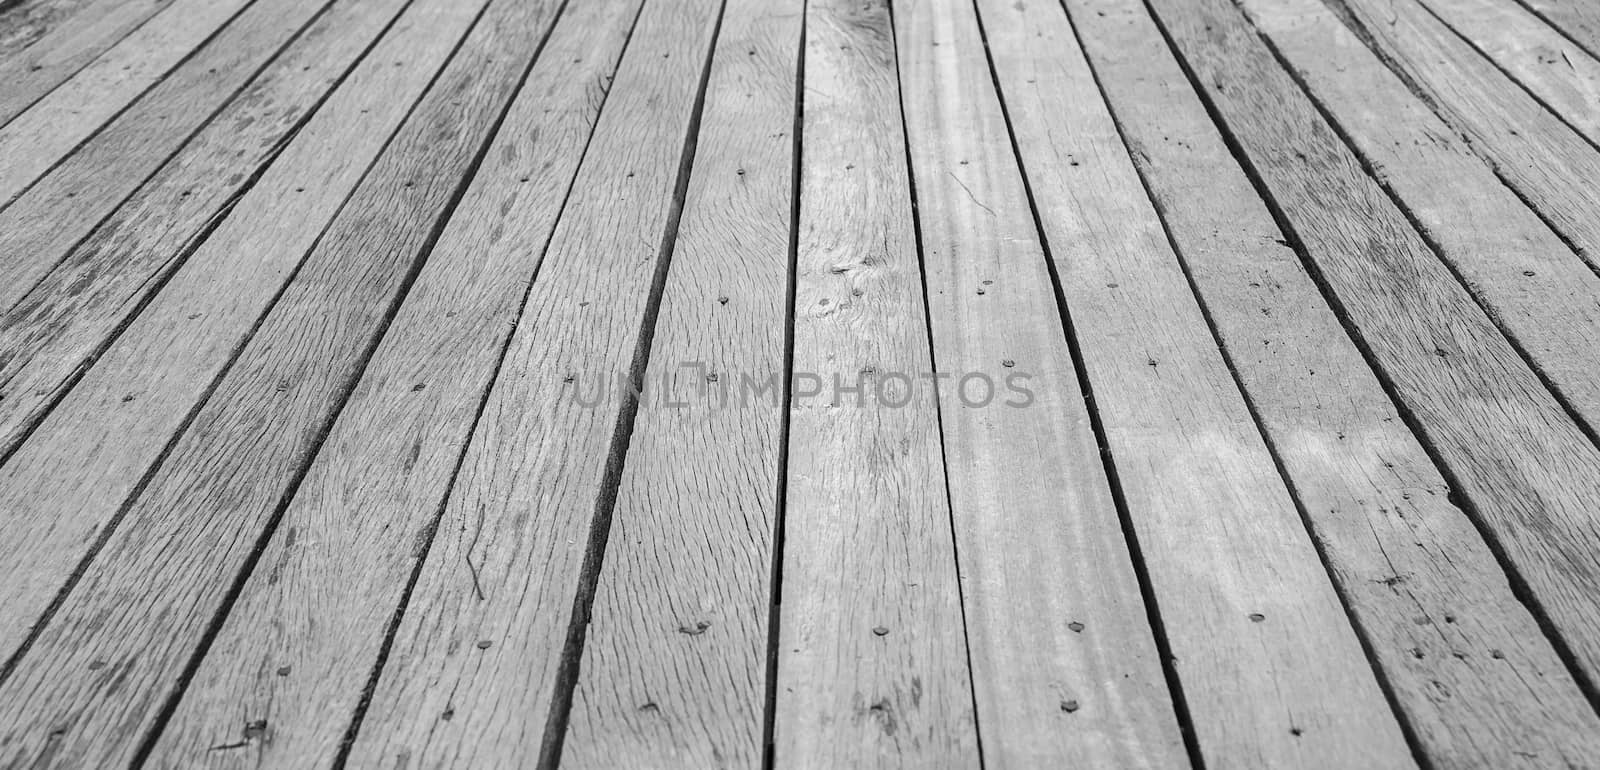 Wood Texture by seksan44